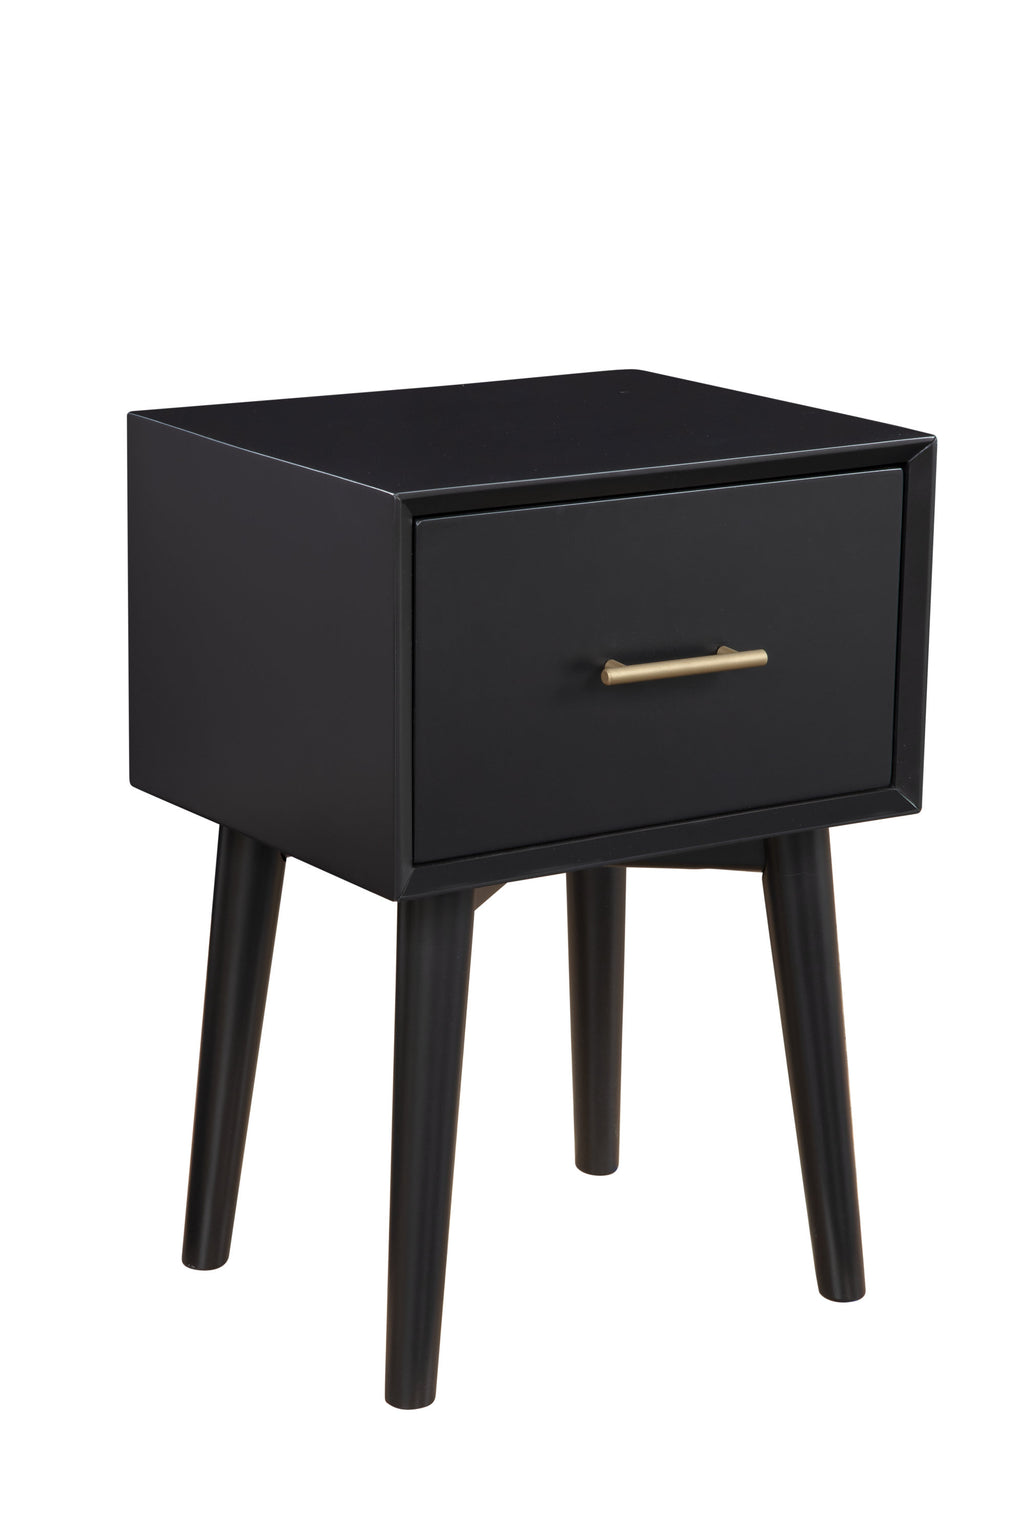 18" Black Mid Century Mod Wood End Table With Drawer